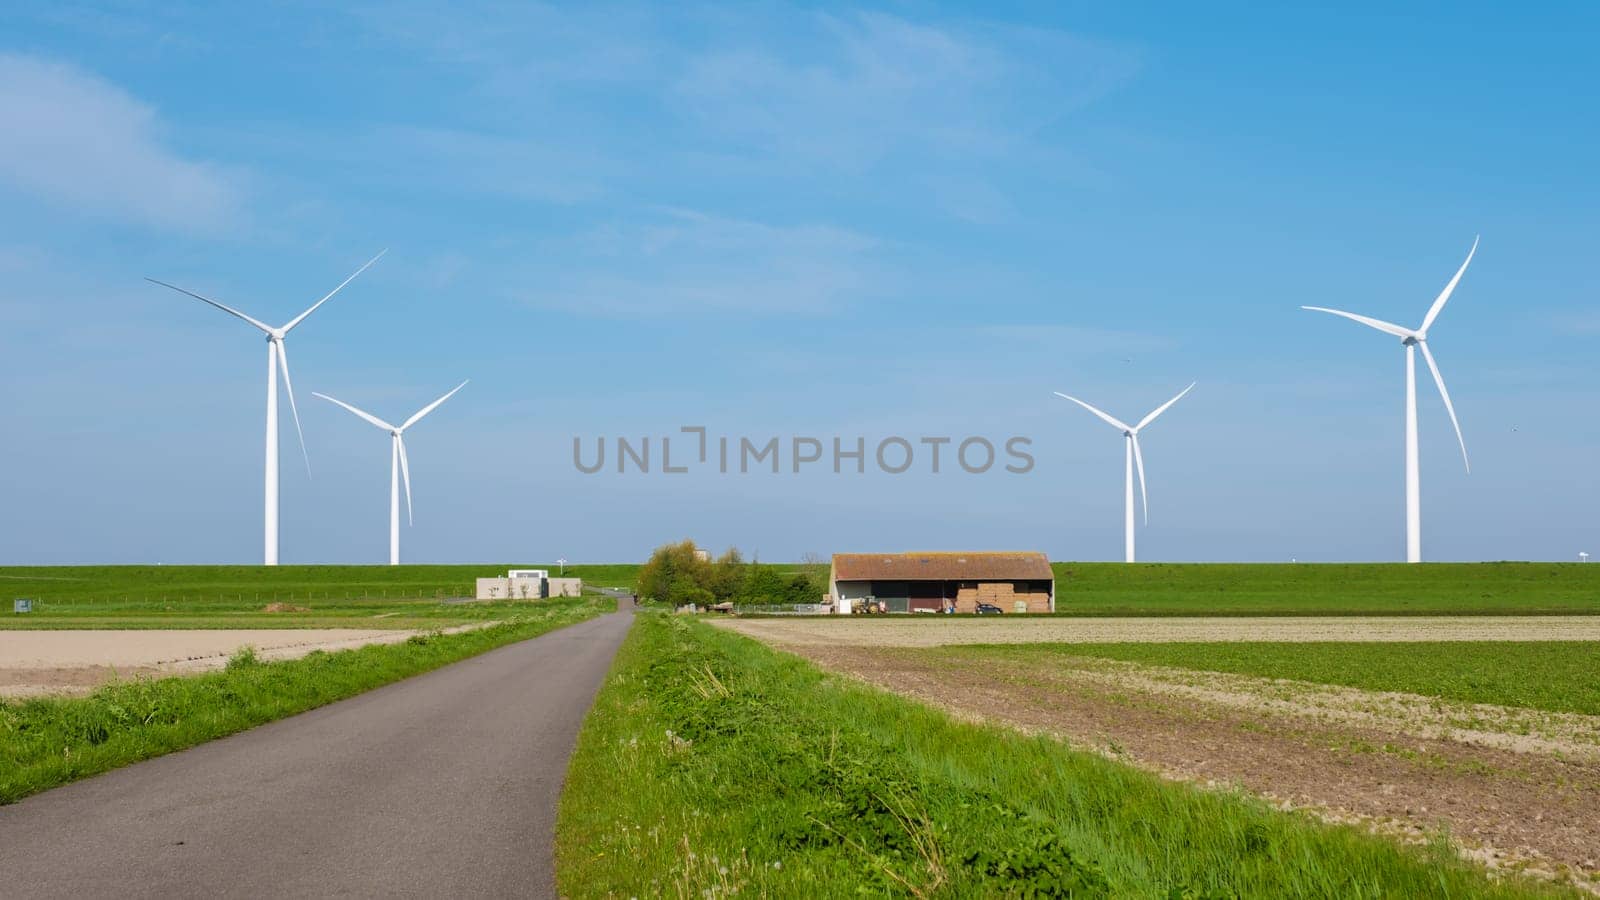 A scenic road winds through a vast field, with towering wind turbines in the background. The turbines spin gracefully in the wind, harnessing renewable energy by fokkebok